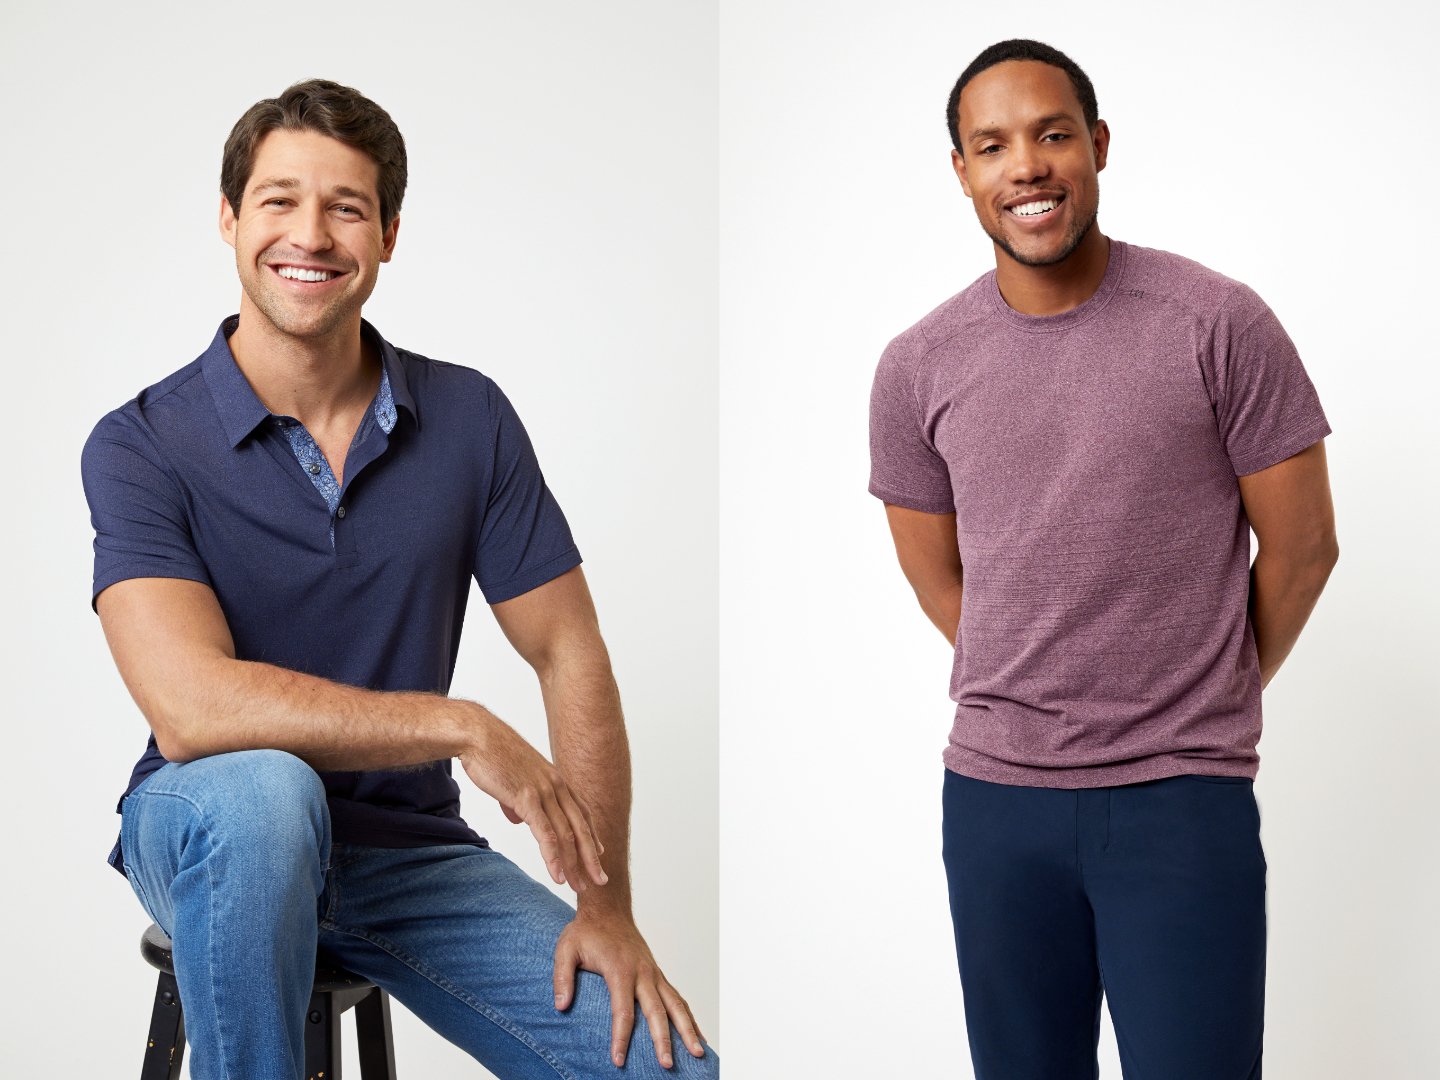 'The Bachelorette' 2022 contestants Hayden and Chris. Hayden is wearing a blue polo and jeans, and Chris is wearing a purple T-shirt and jeans.